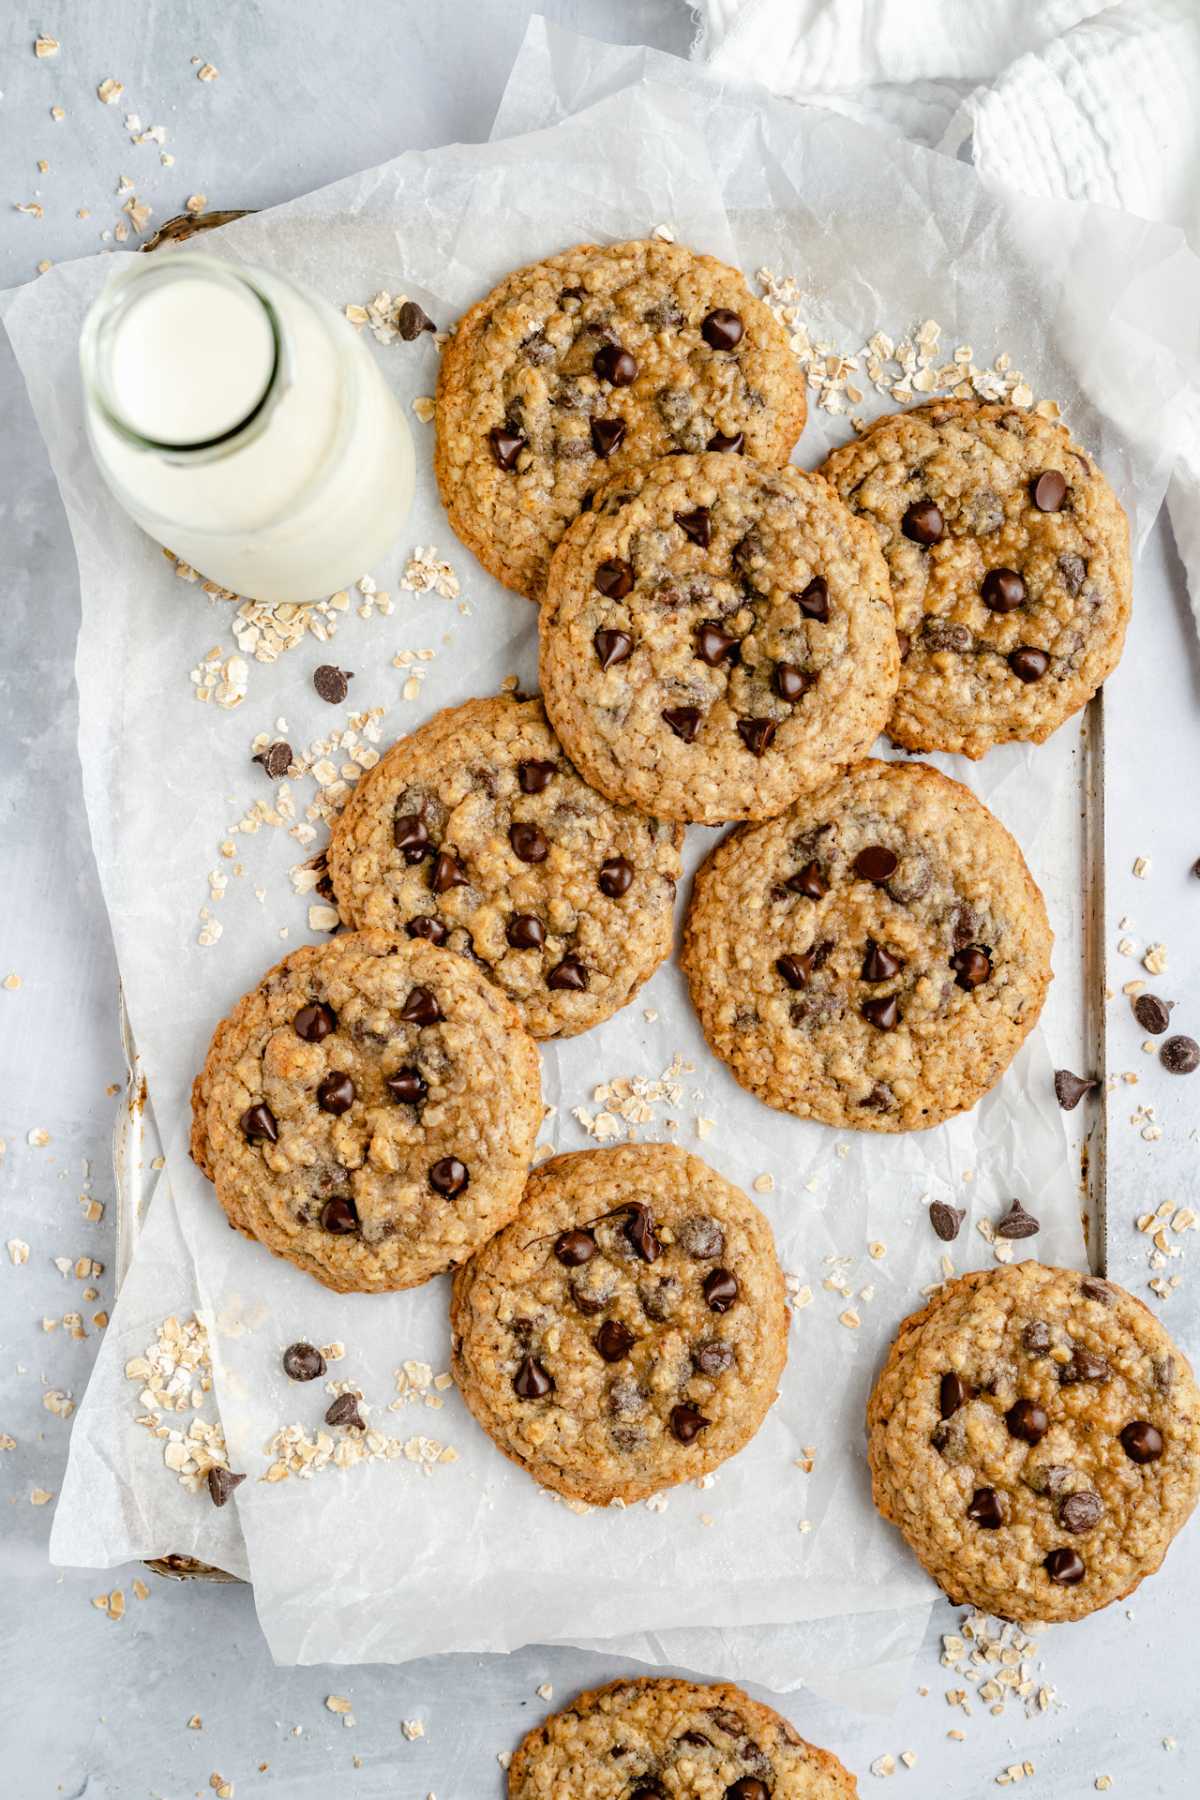 Oatmeal chocolate chip cookies on parchment paper with a glass of milk.